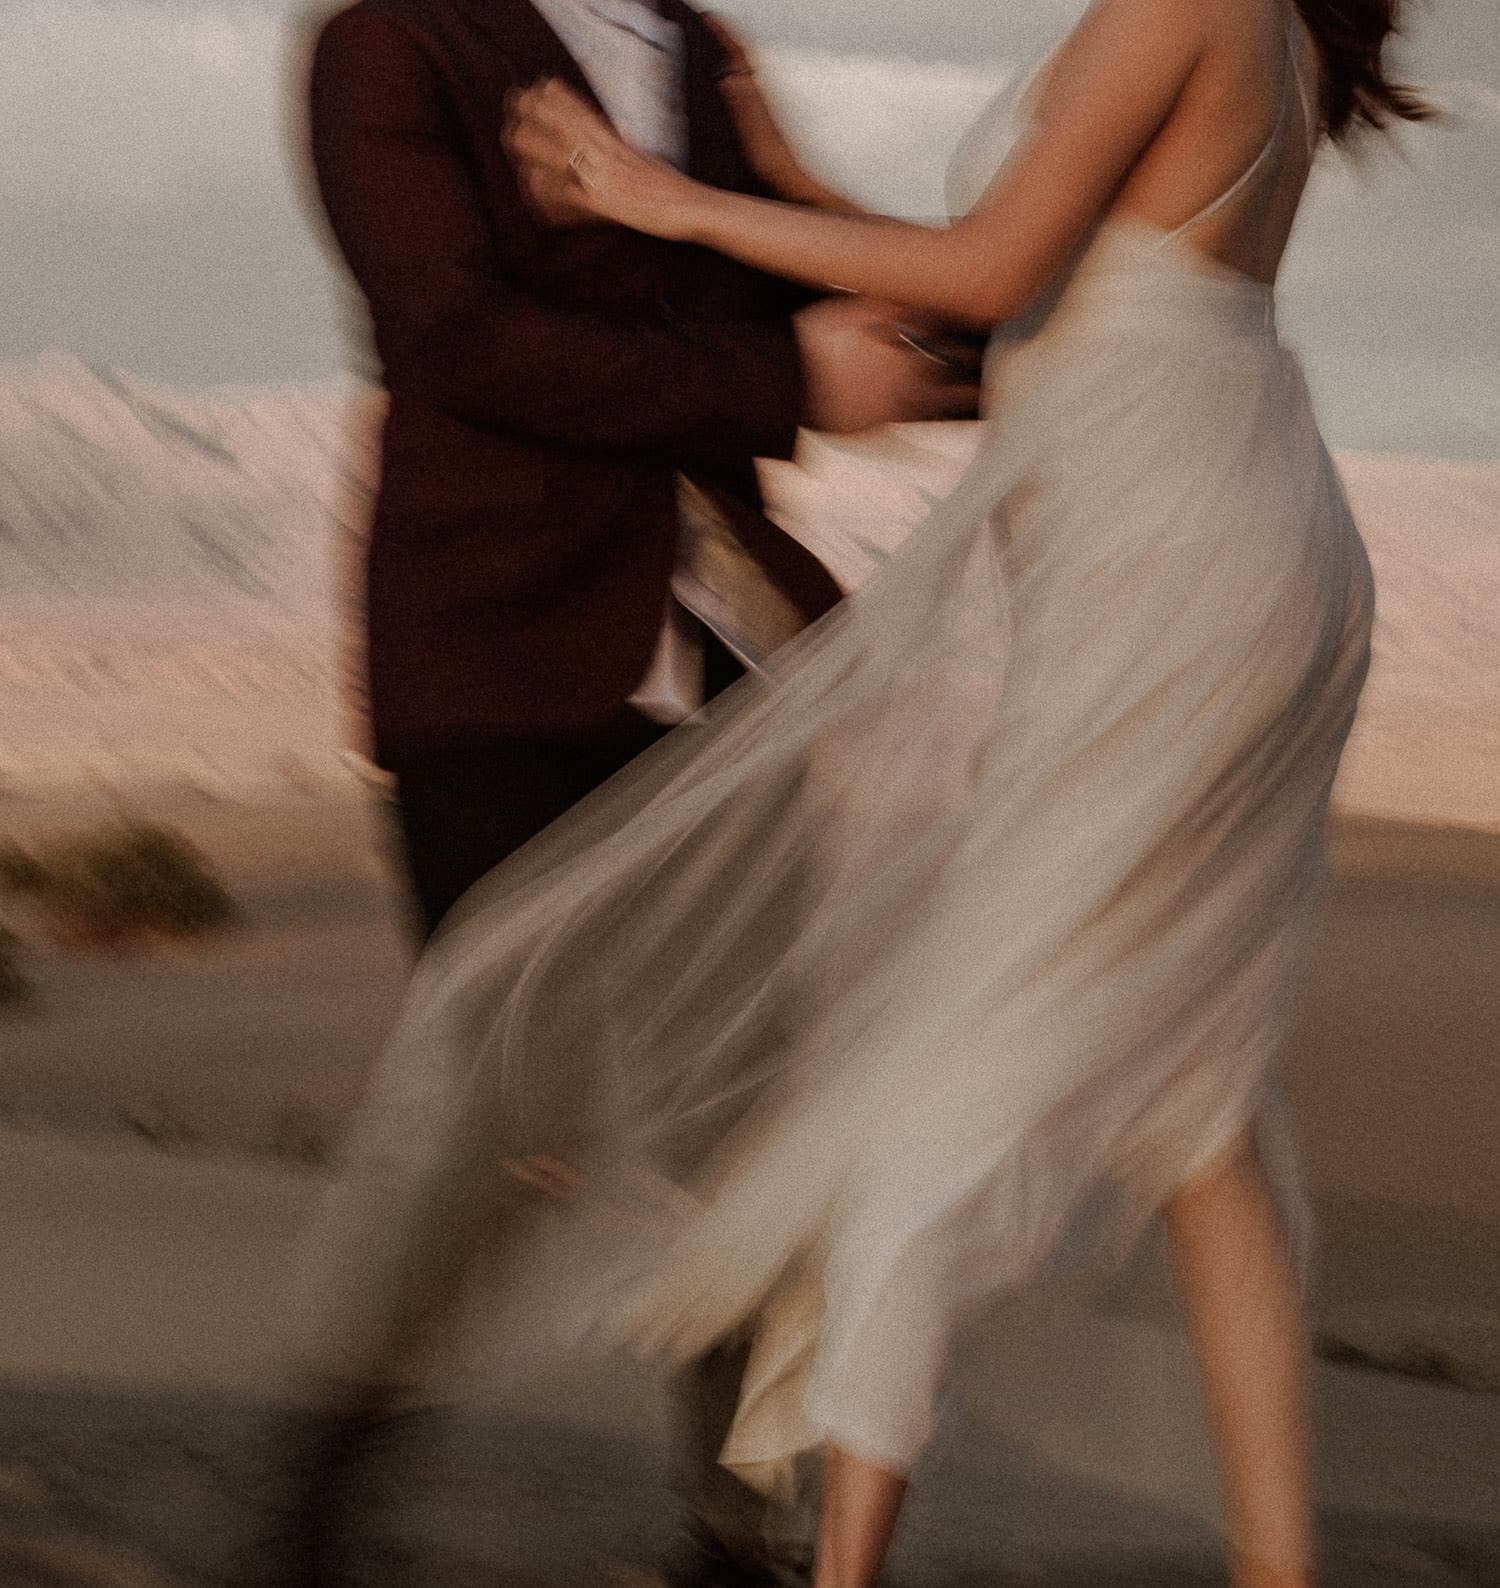 Elopement couples first dance in the sand dunes while the sun slowly sets behind the mountains. Brides dress blows in the wind